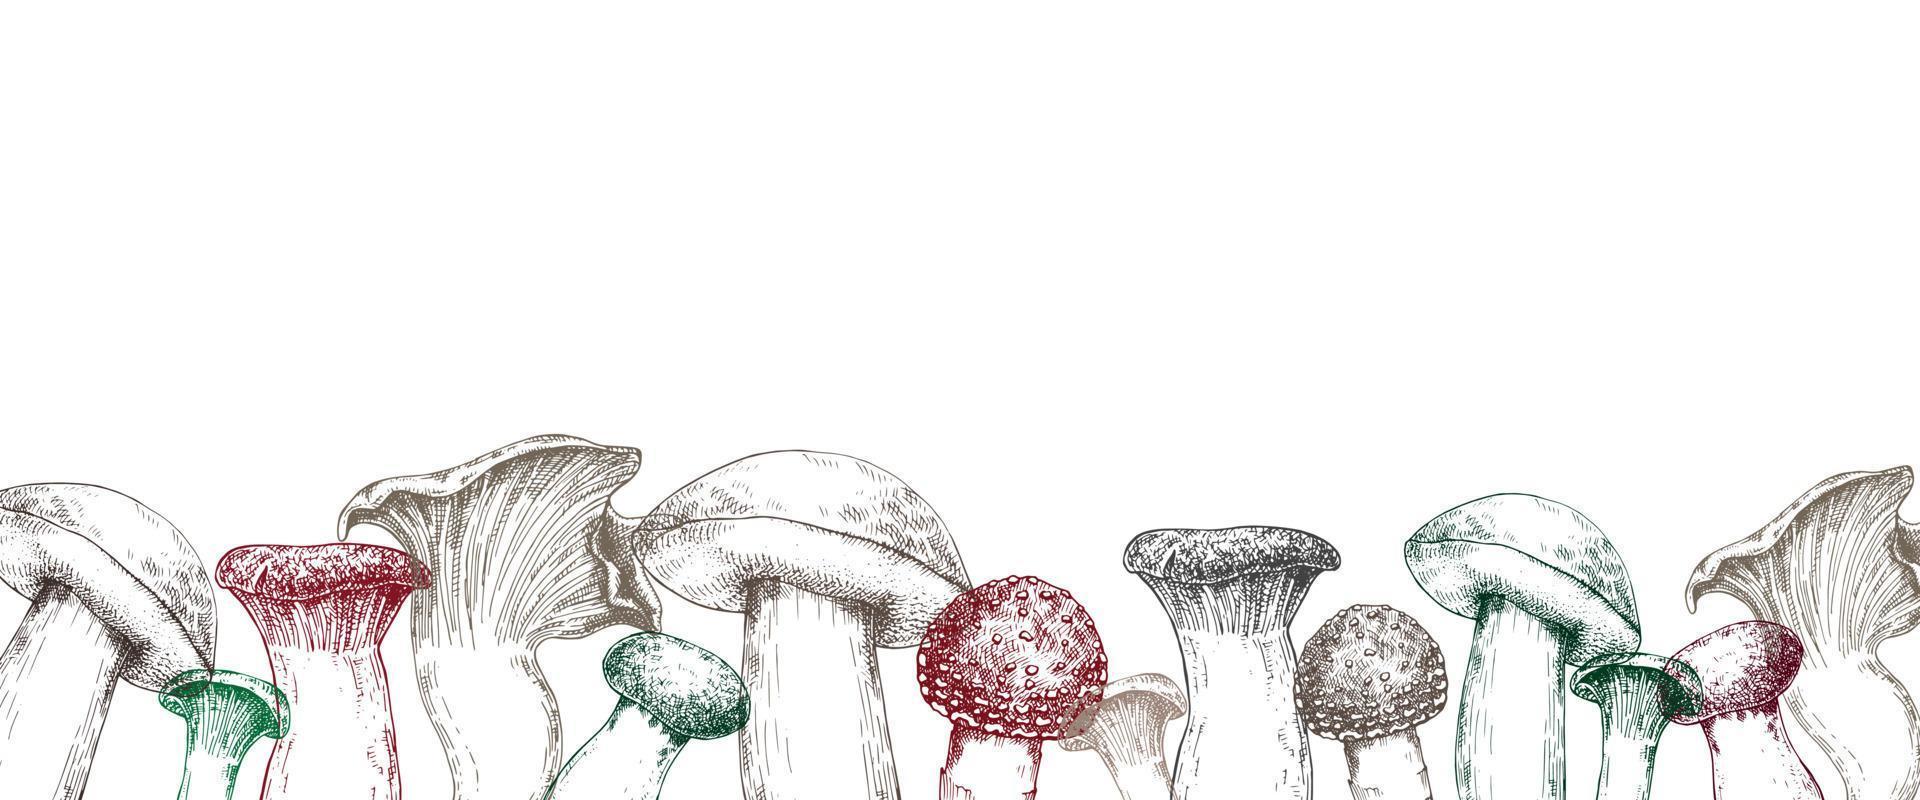 vector illustration, border with mushrooms. mushrooms drawn in vintage style, graphics isolated on white background